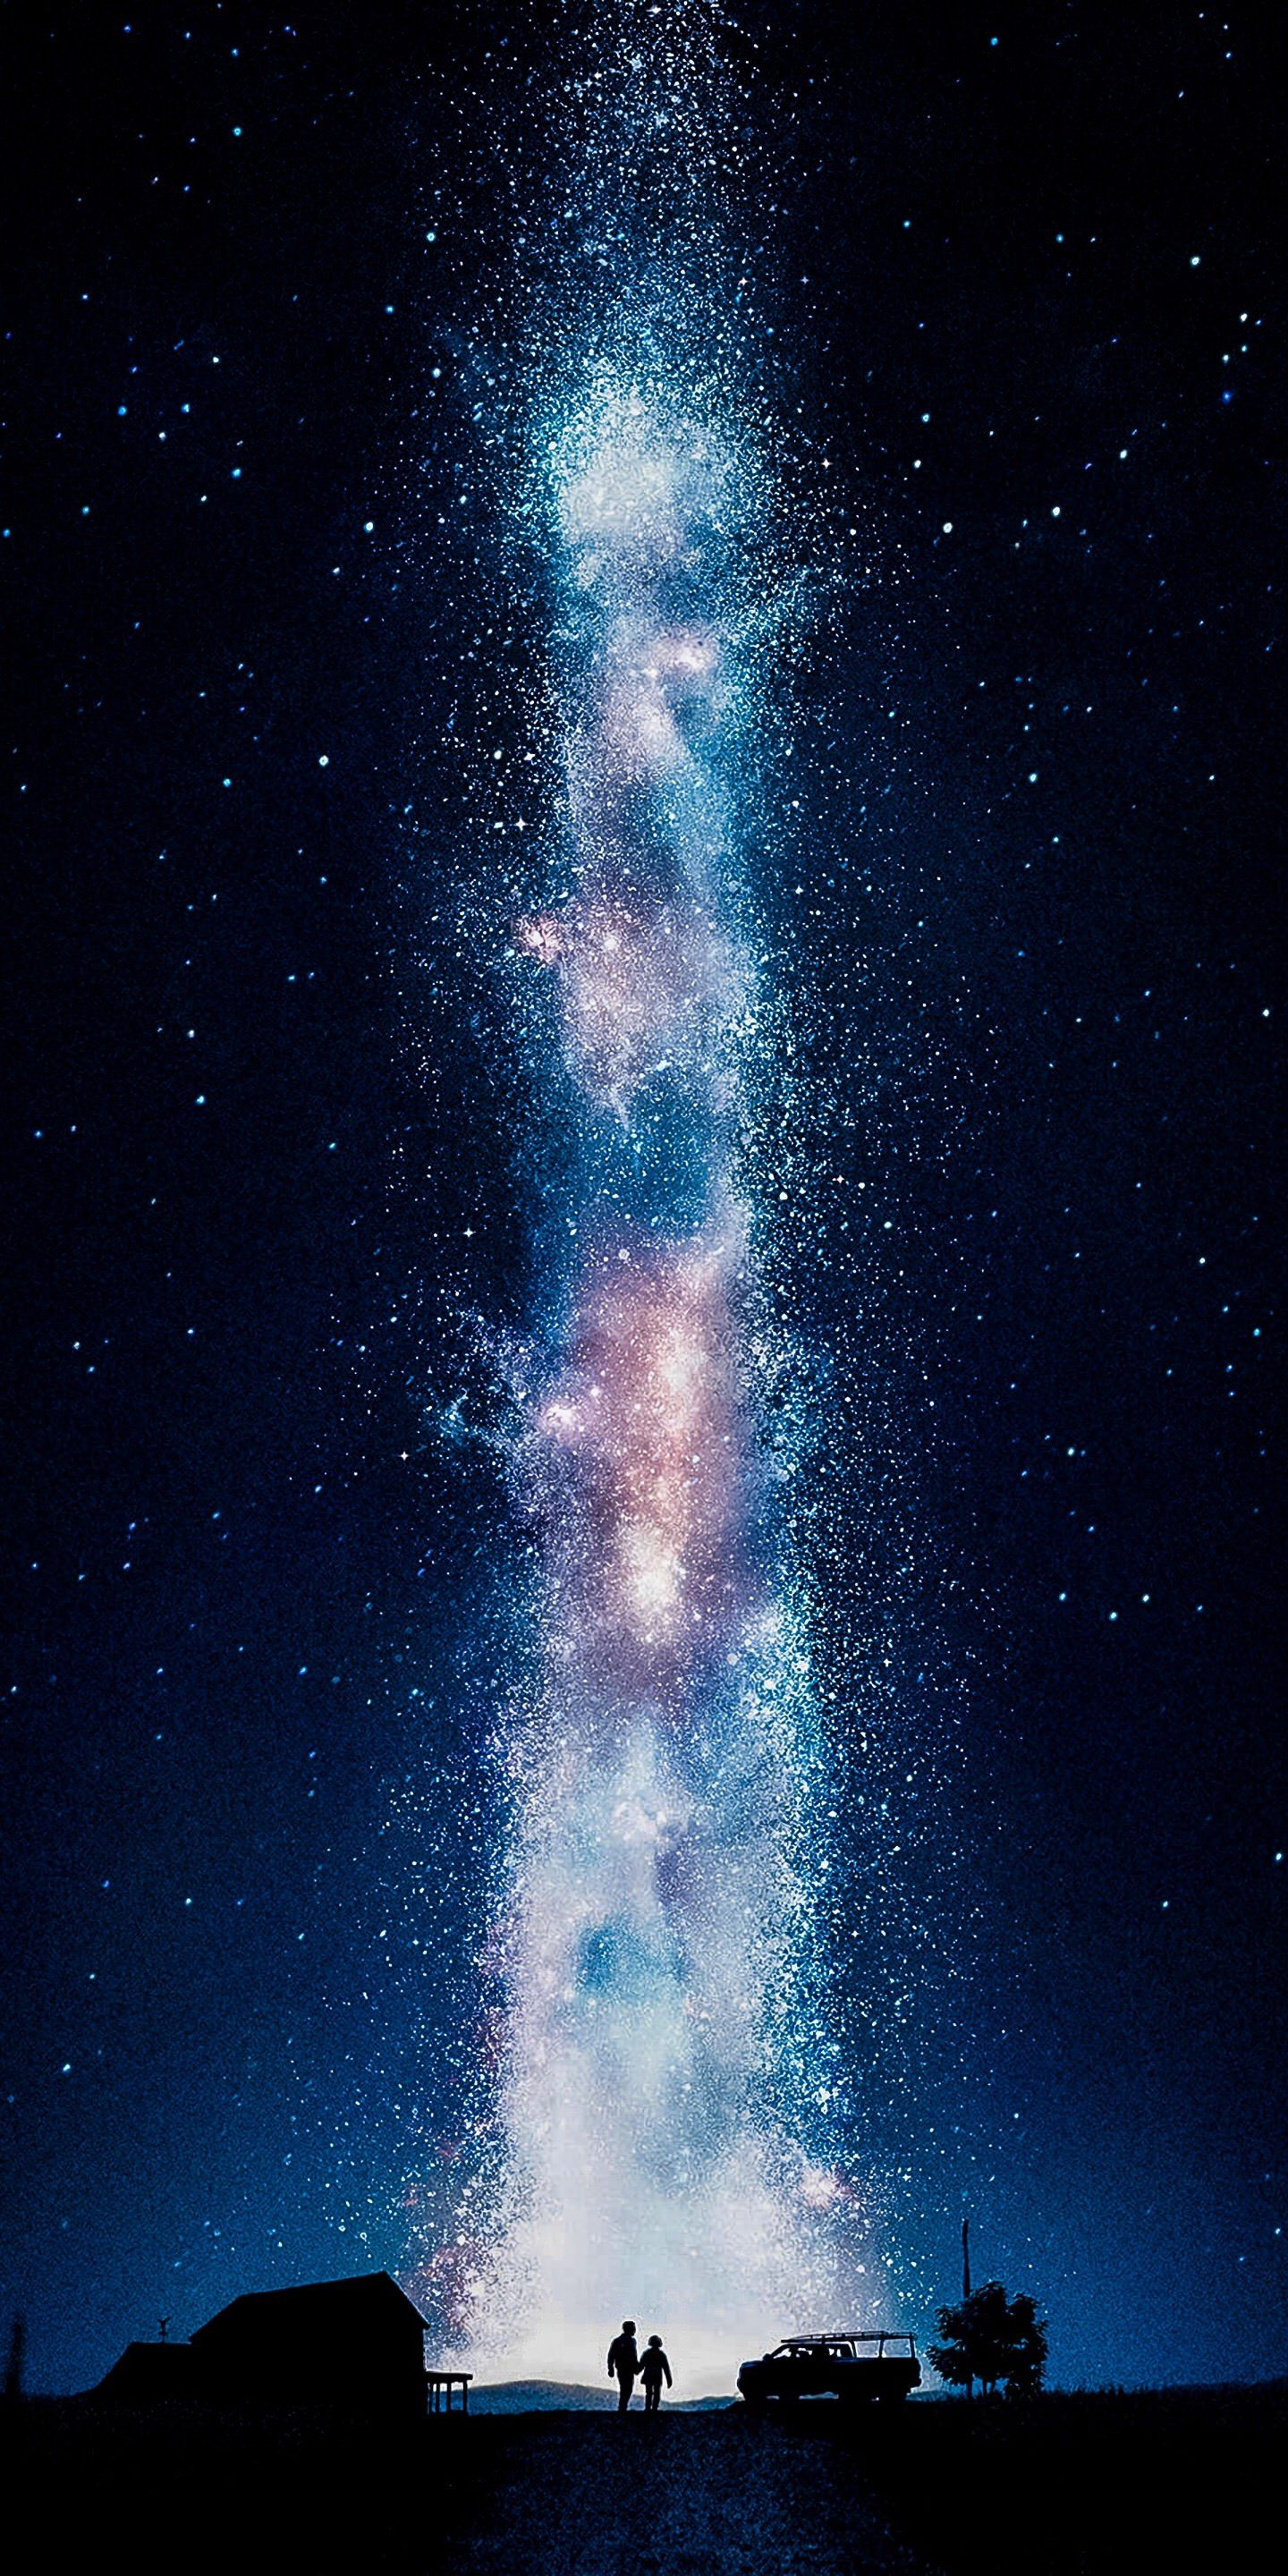 Wallpapers Space Iphone